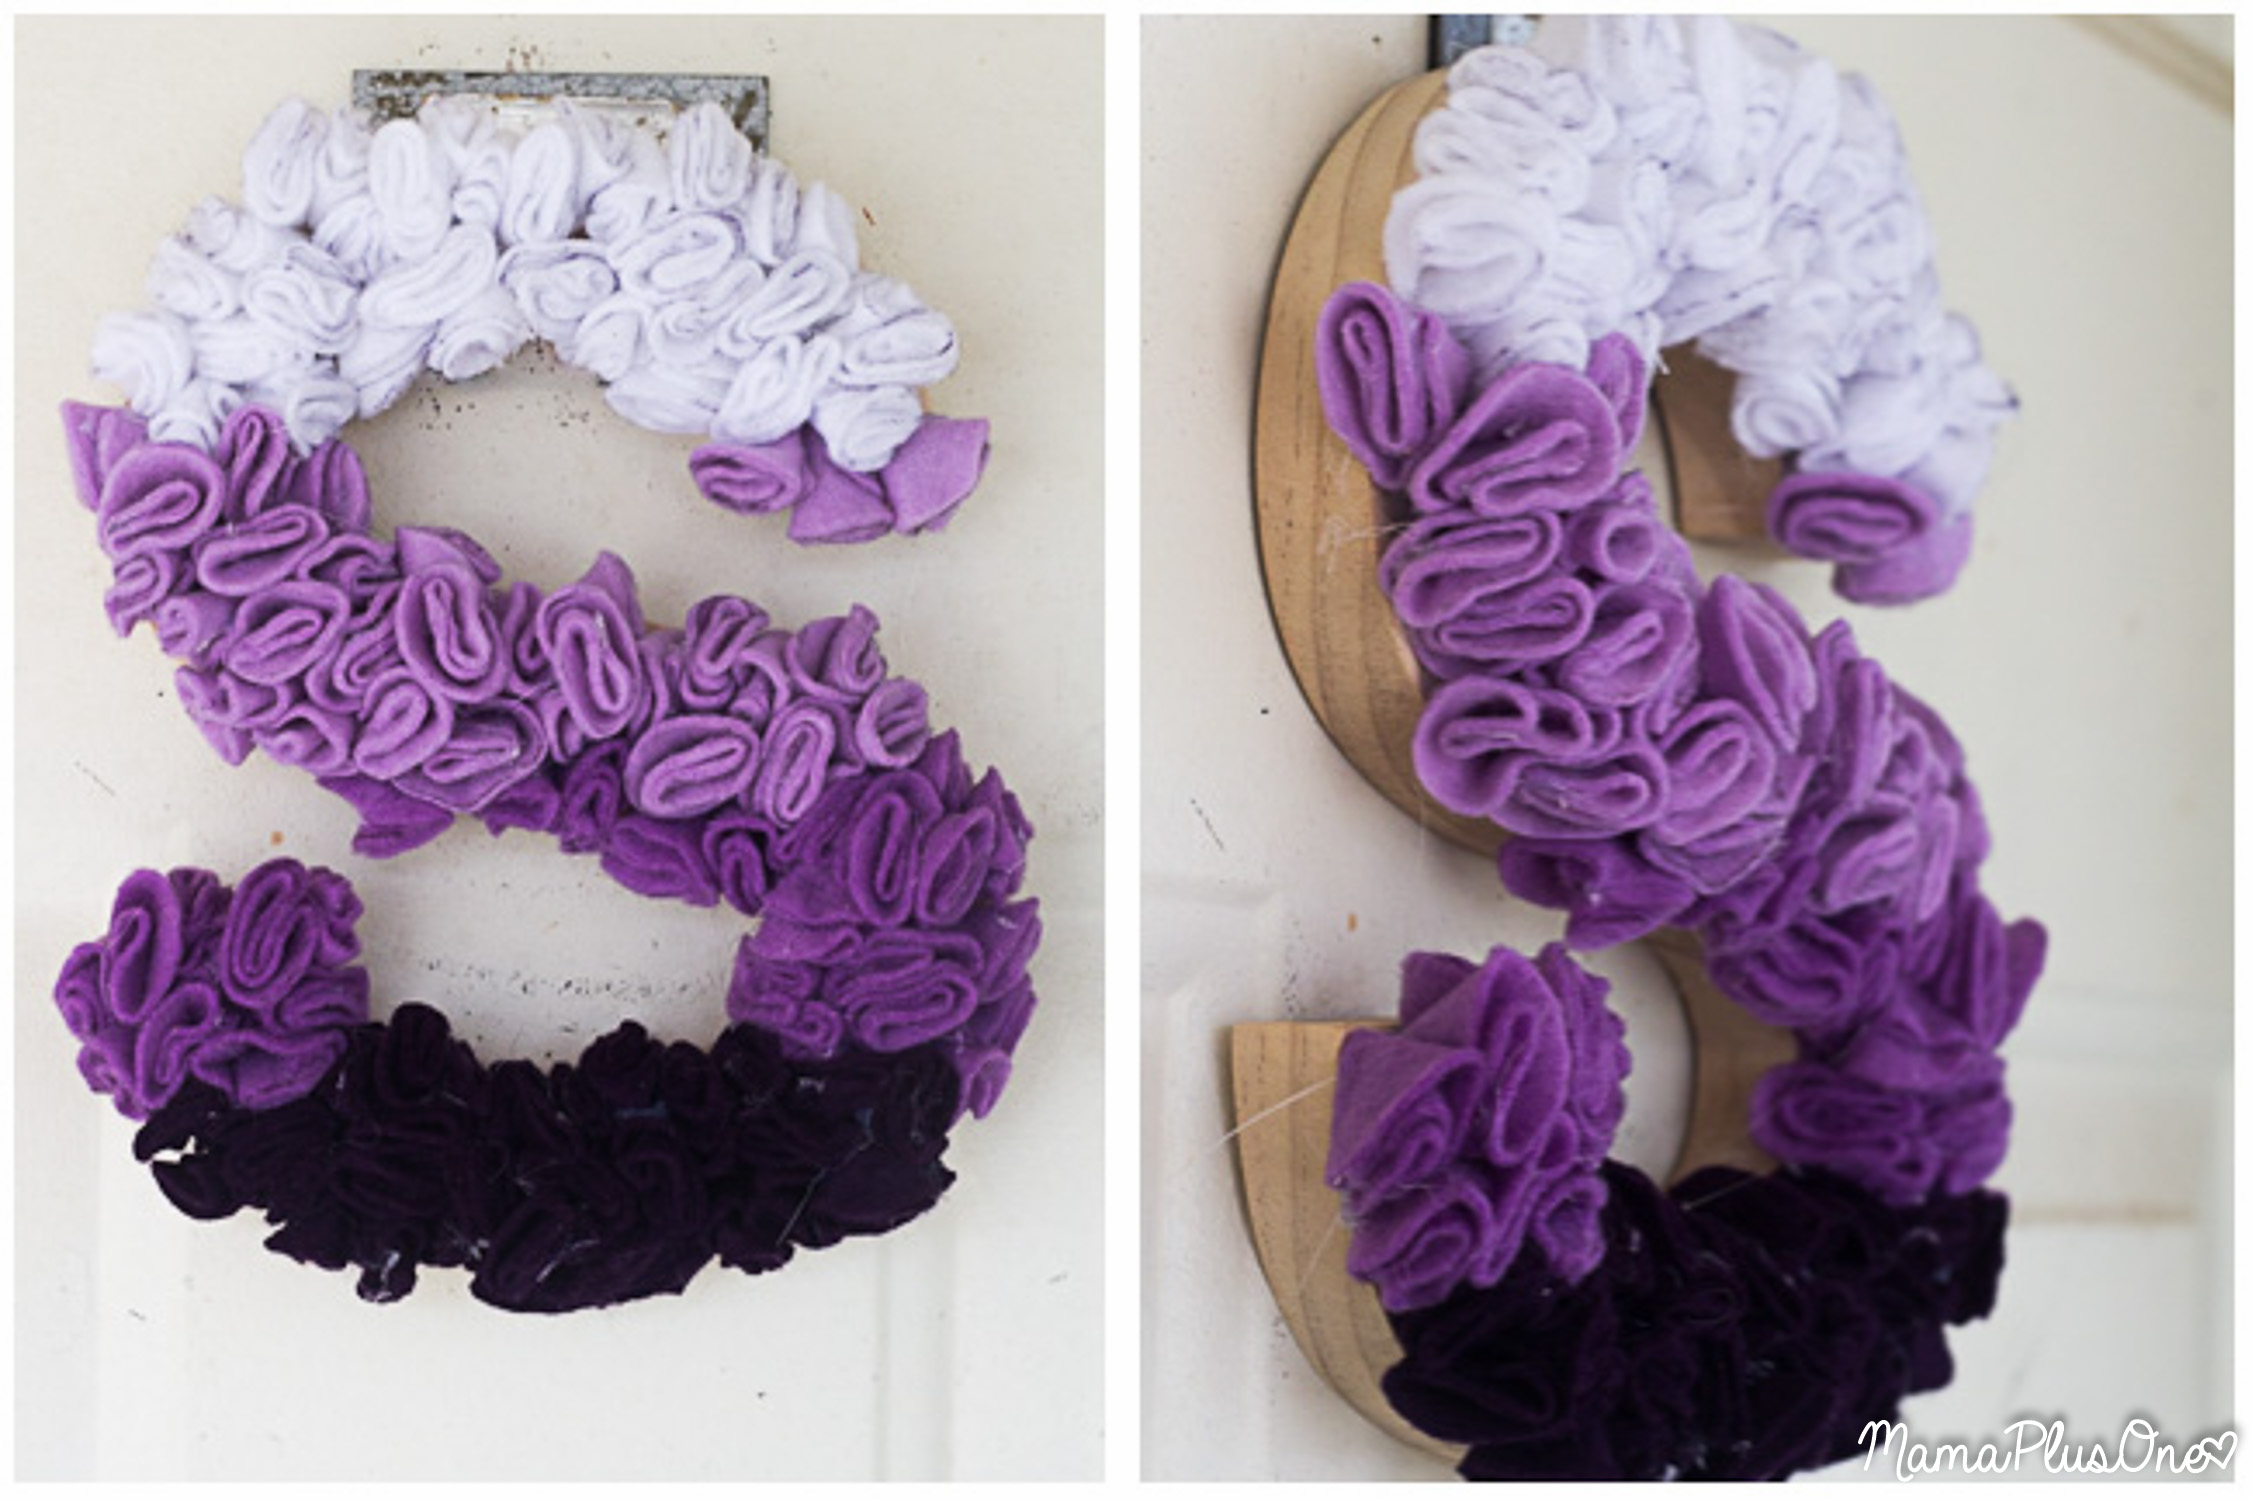 If you’re looking for the perfect door hanging or office decor, you’re going to love this impossibly easy ombre flower monogram! If you can trace a circle, fold a piece of felt, and use a hot glue gun, you can make this! It is the perfect substitute for a DIY Wreath, or looks great on any wall! Just pick the letter or wooden shape that appeals to you, and you’re all set to make this fun creation!